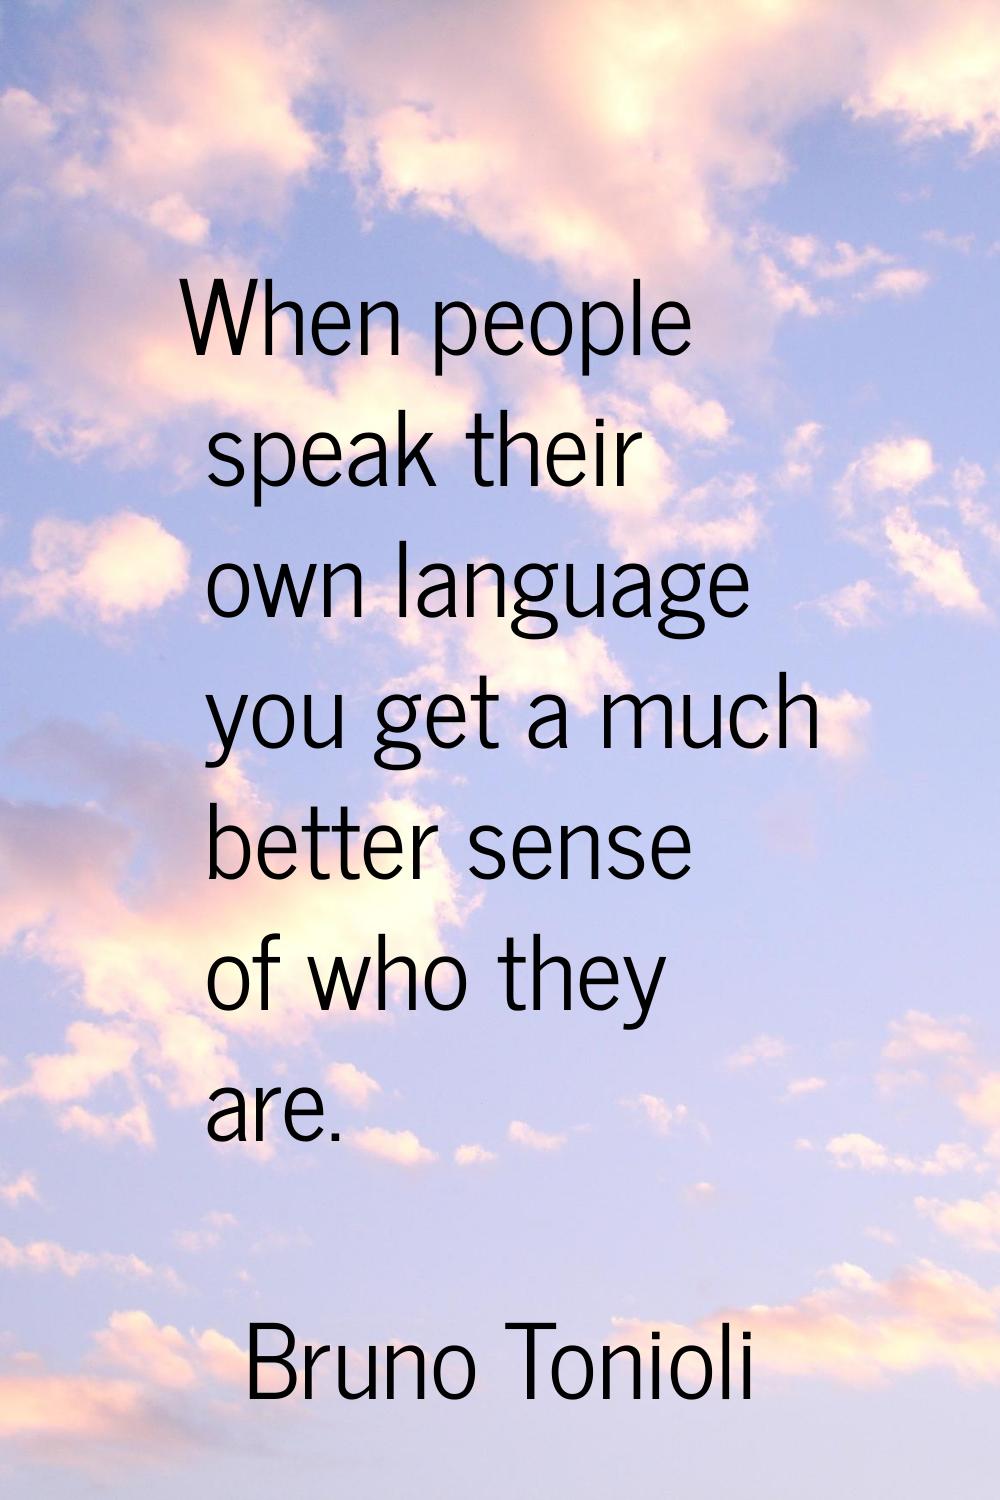 When people speak their own language you get a much better sense of who they are.